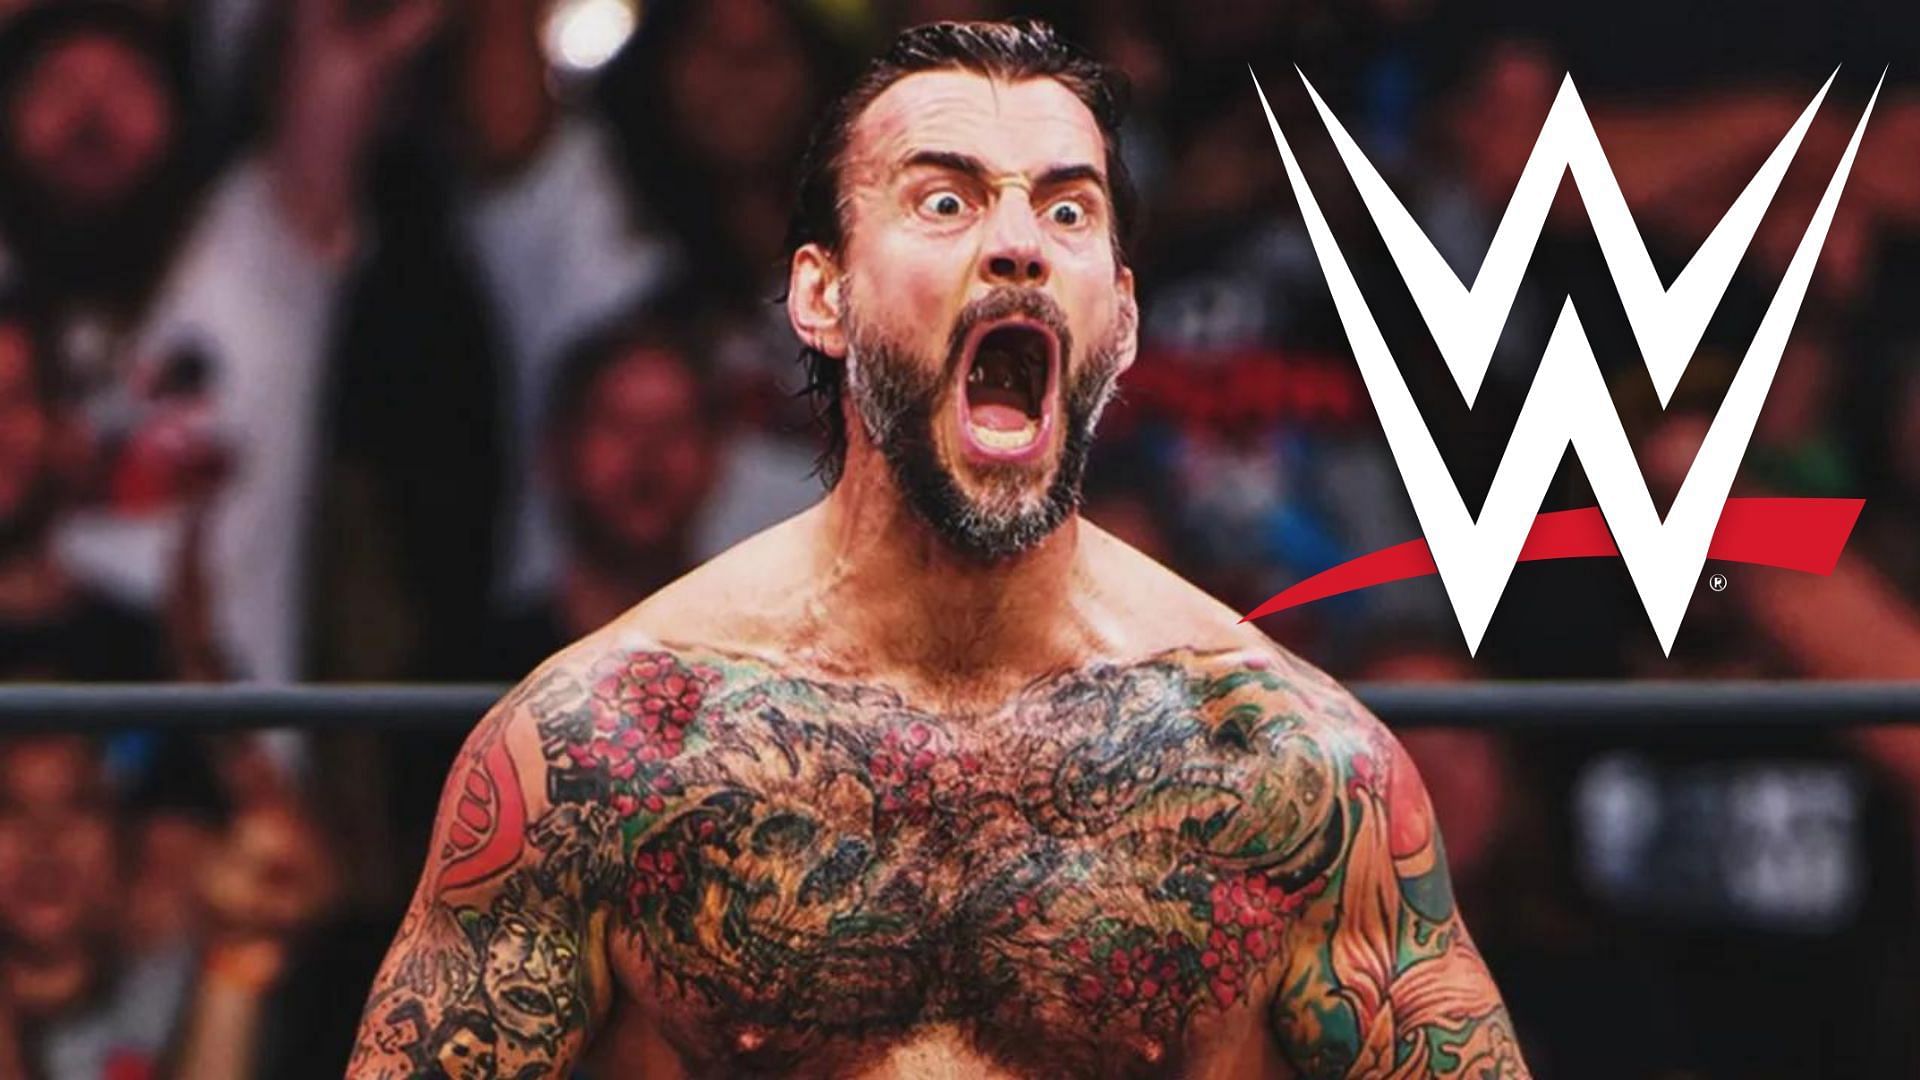 CM Punk has been a hot topic this week